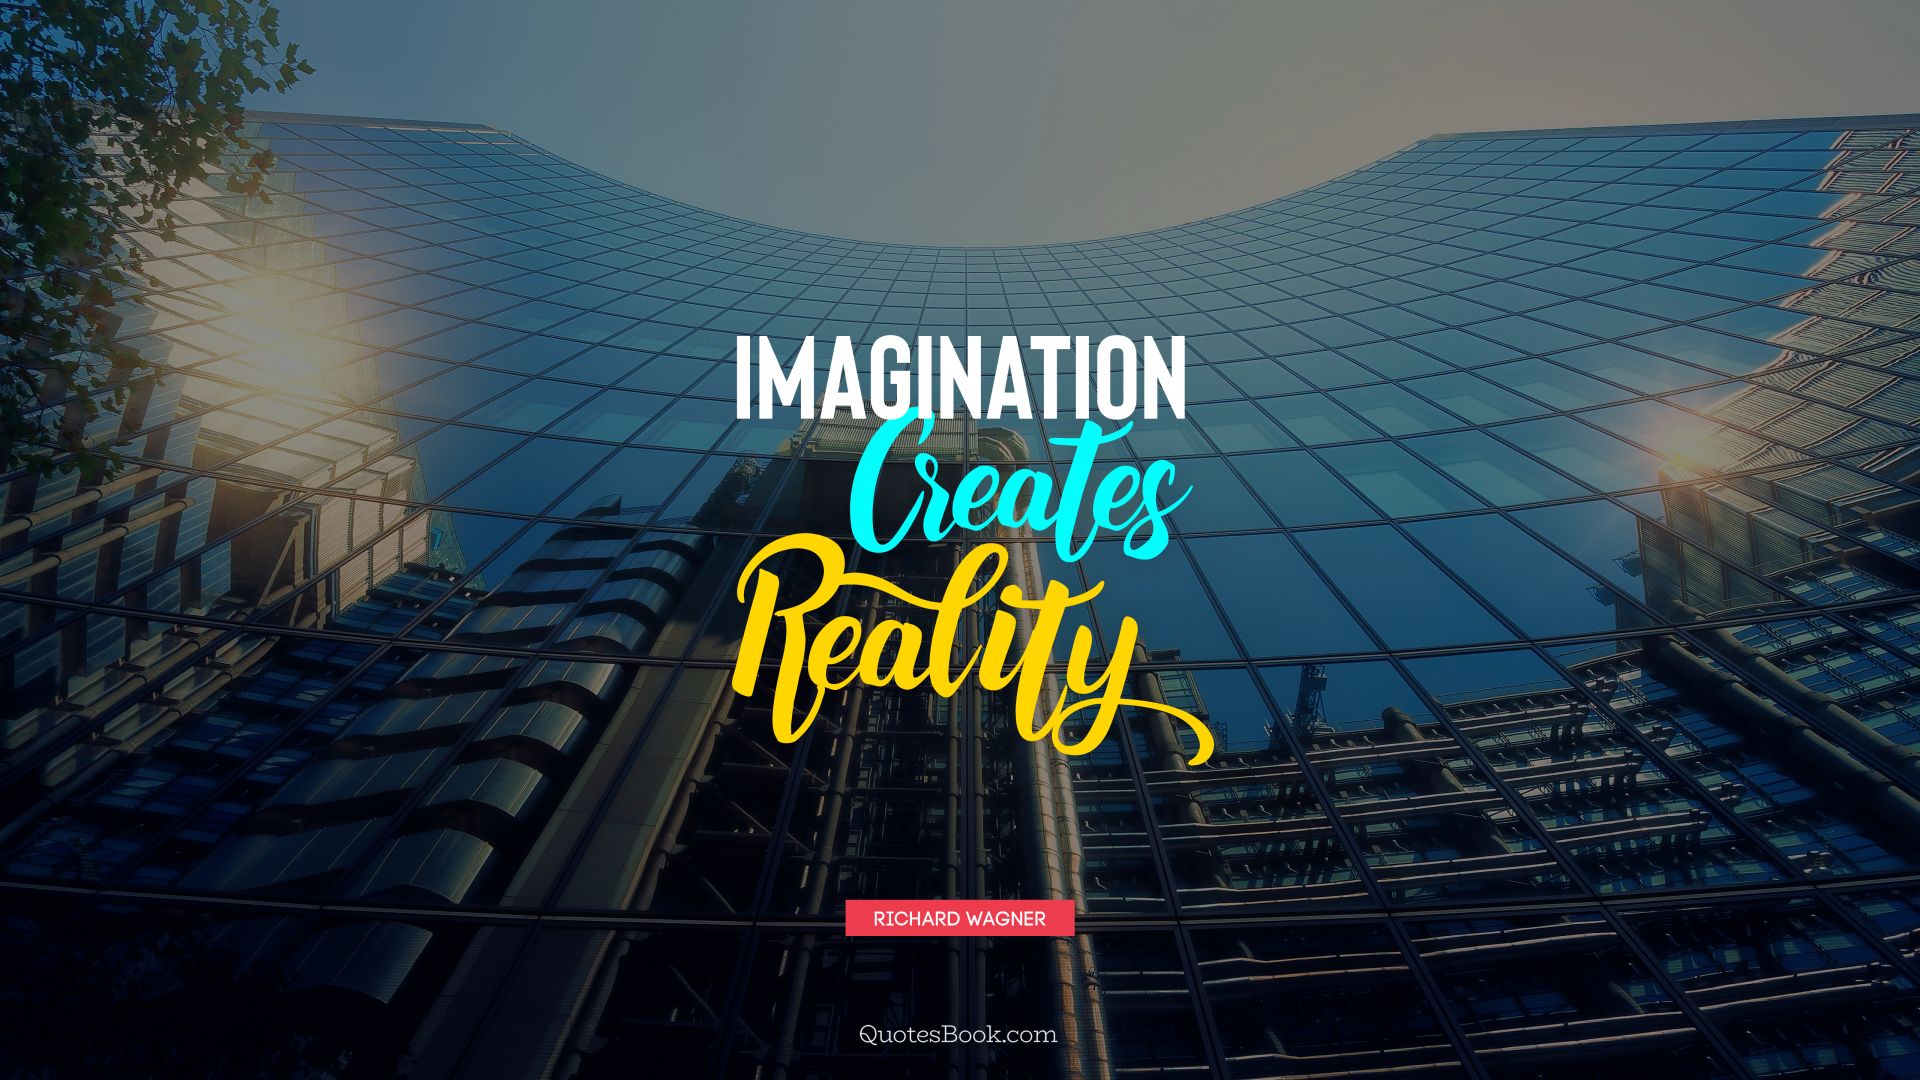 Imagination creates reality. - Quote by Richard Wagner